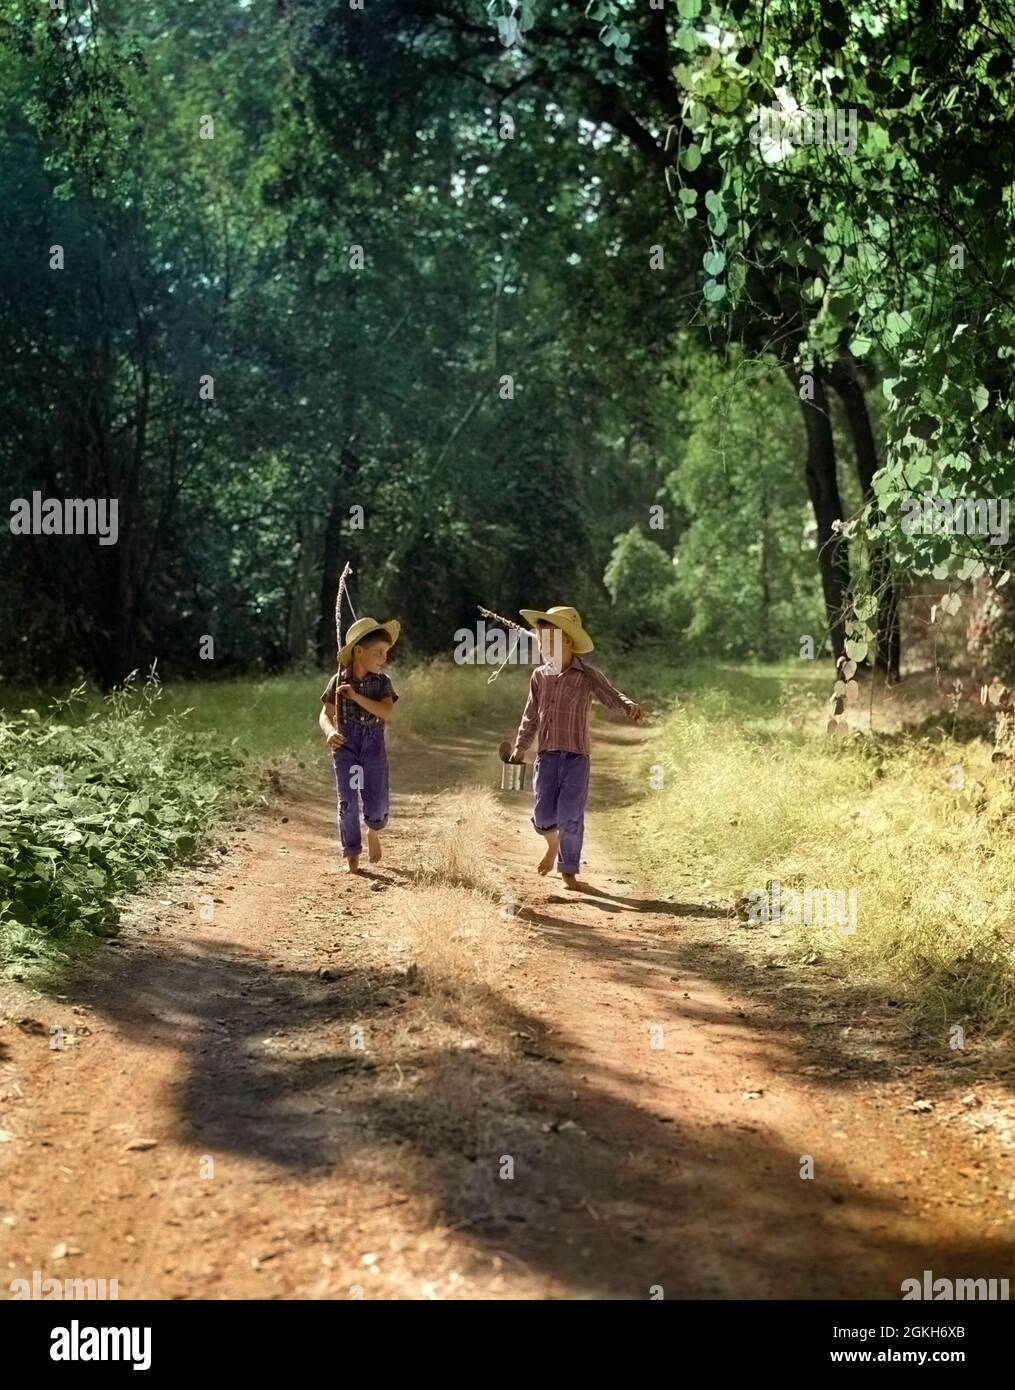 https://c8.alamy.com/comp/2GKH6XB/1940s-1950s-two-boys-in-dungarees-plaid-shirts-straw-hats-walking-down-dirt-road-carrying-fishing-poles-and-can-of-bait-a2326c-pun001-hars-action-jeans-hiking-old-time-nostalgia-brother-old-fashion-1-juvenile-pole-friend-lifestyle-brothers-fisherman-copy-space-friendship-full-length-persons-farming-males-sunny-hook-rod-siblings-tackle-hike-angler-bw-summertime-catching-dirt-poles-activity-fishing-pole-fishing-tackle-hobby-leisure-victory-anglers-fishing-rods-bonding-farmers-fishing-poles-hiker-hobbies-recreation-pal-reel-recreation-fishing-sibling-straw-hat-friendly-huck-finn-worm-angling-2GKH6XB.jpg